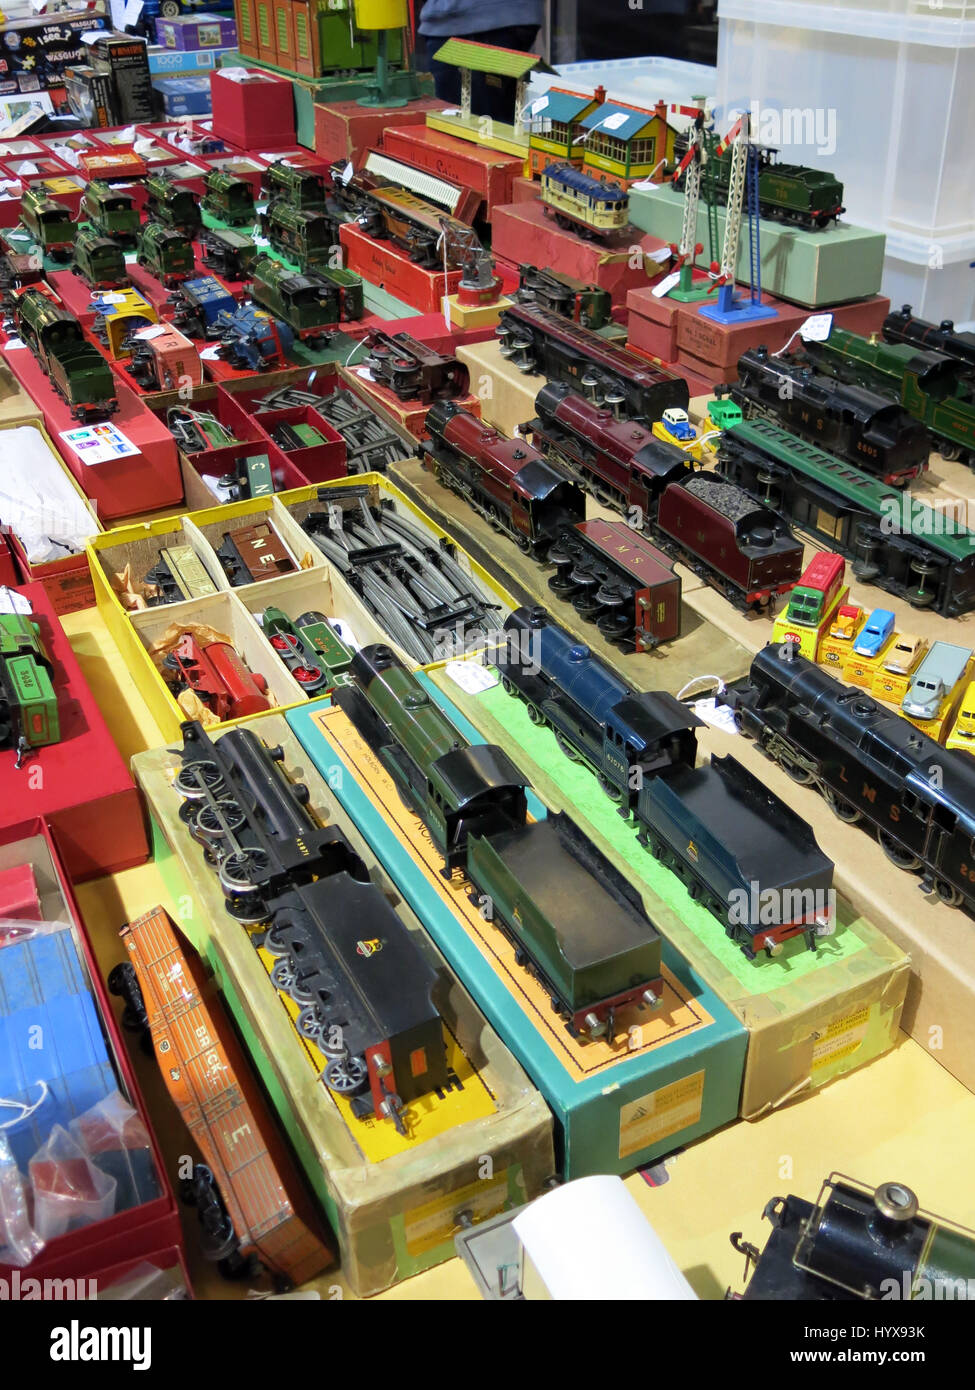 hornby electric trains